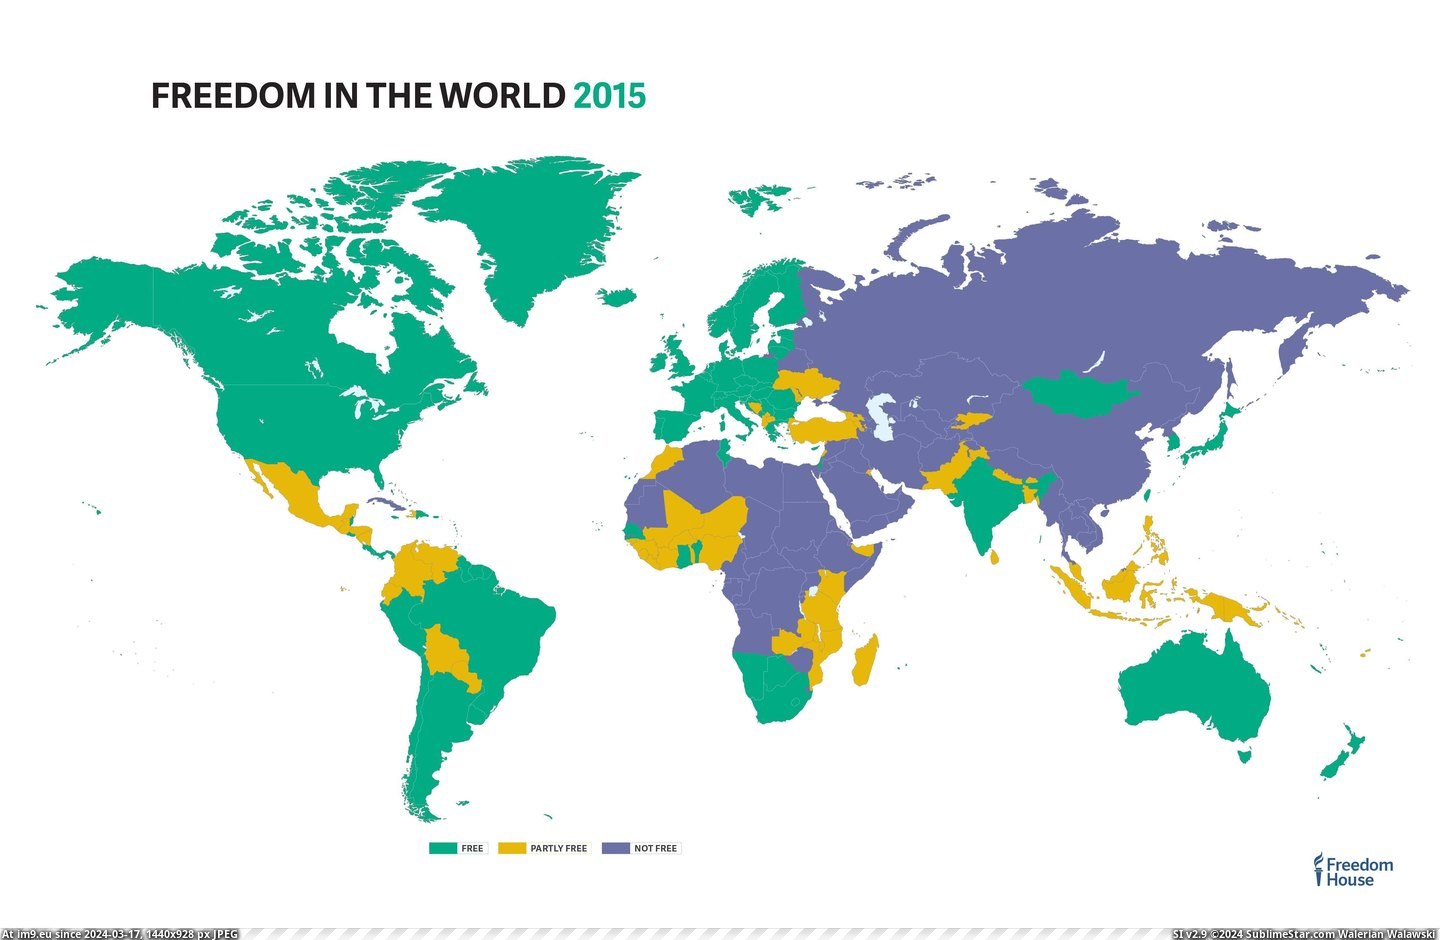 #World #Freedom #House [Mapporn] Freedom House - Freedom in the World 2015 [5100x3300] Pic. (Image of album My r/MAPS favs))